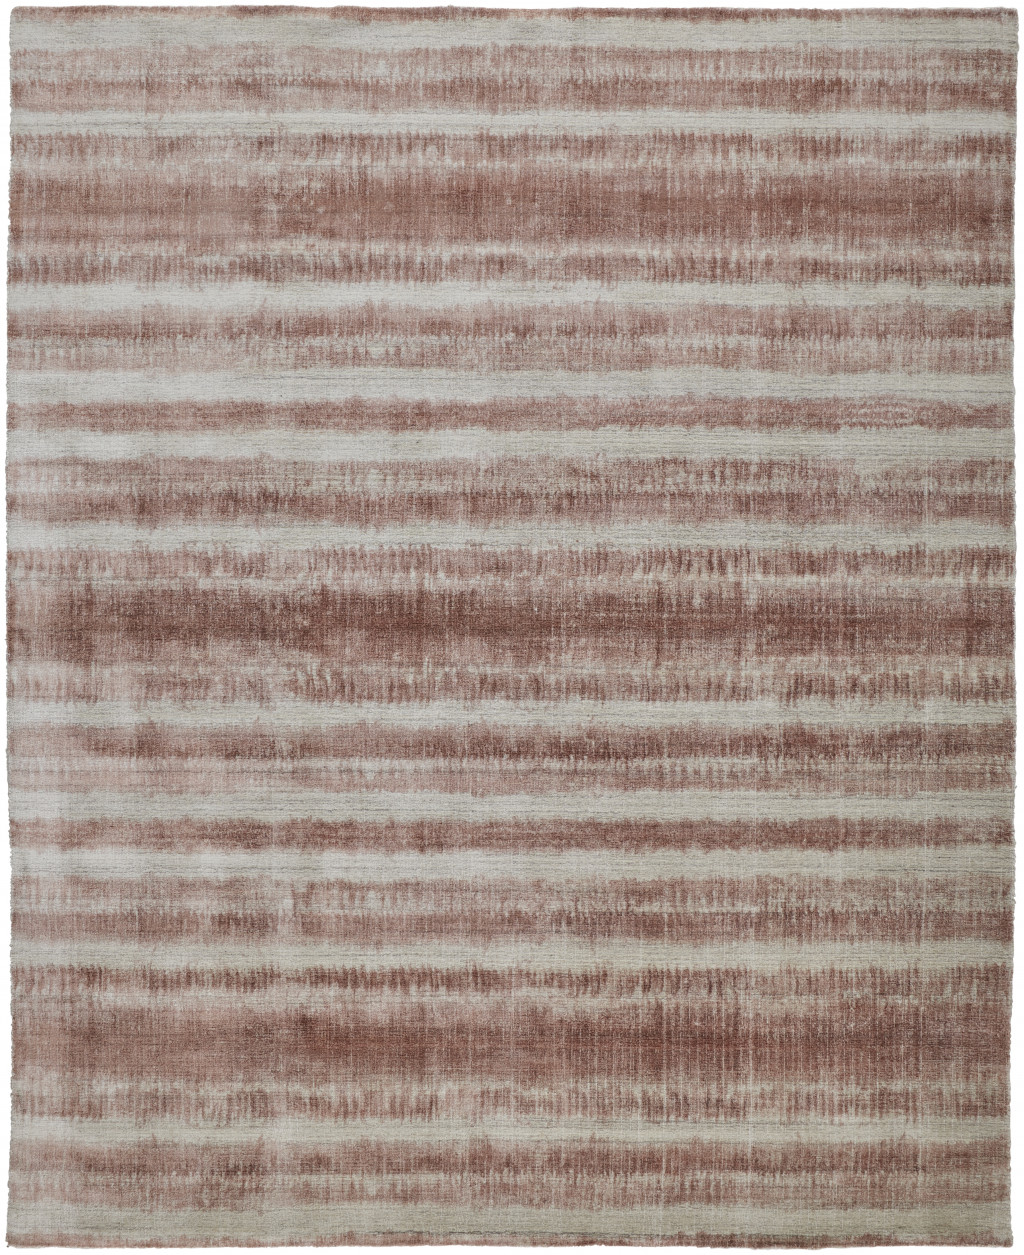 9' X 12' Tan Ivory And Pink Abstract Hand Woven Area Rug-514424-1